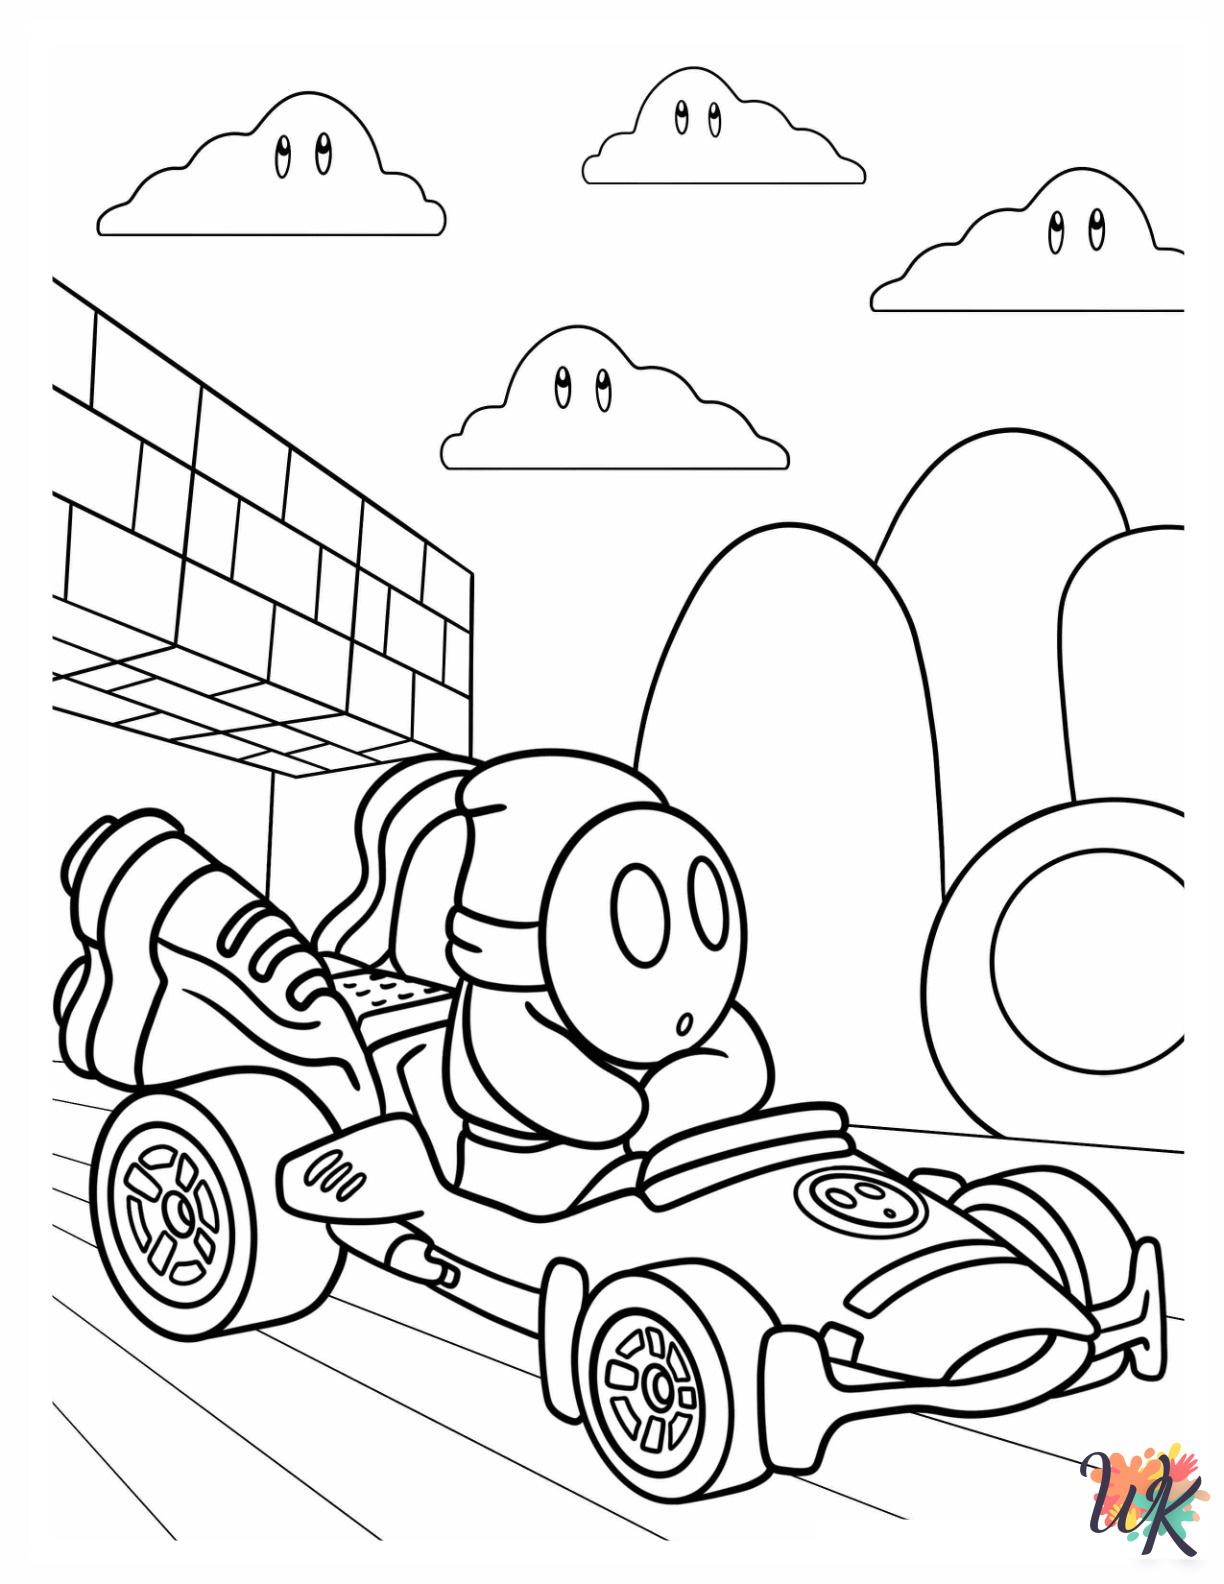 Shy Guy adult coloring pages